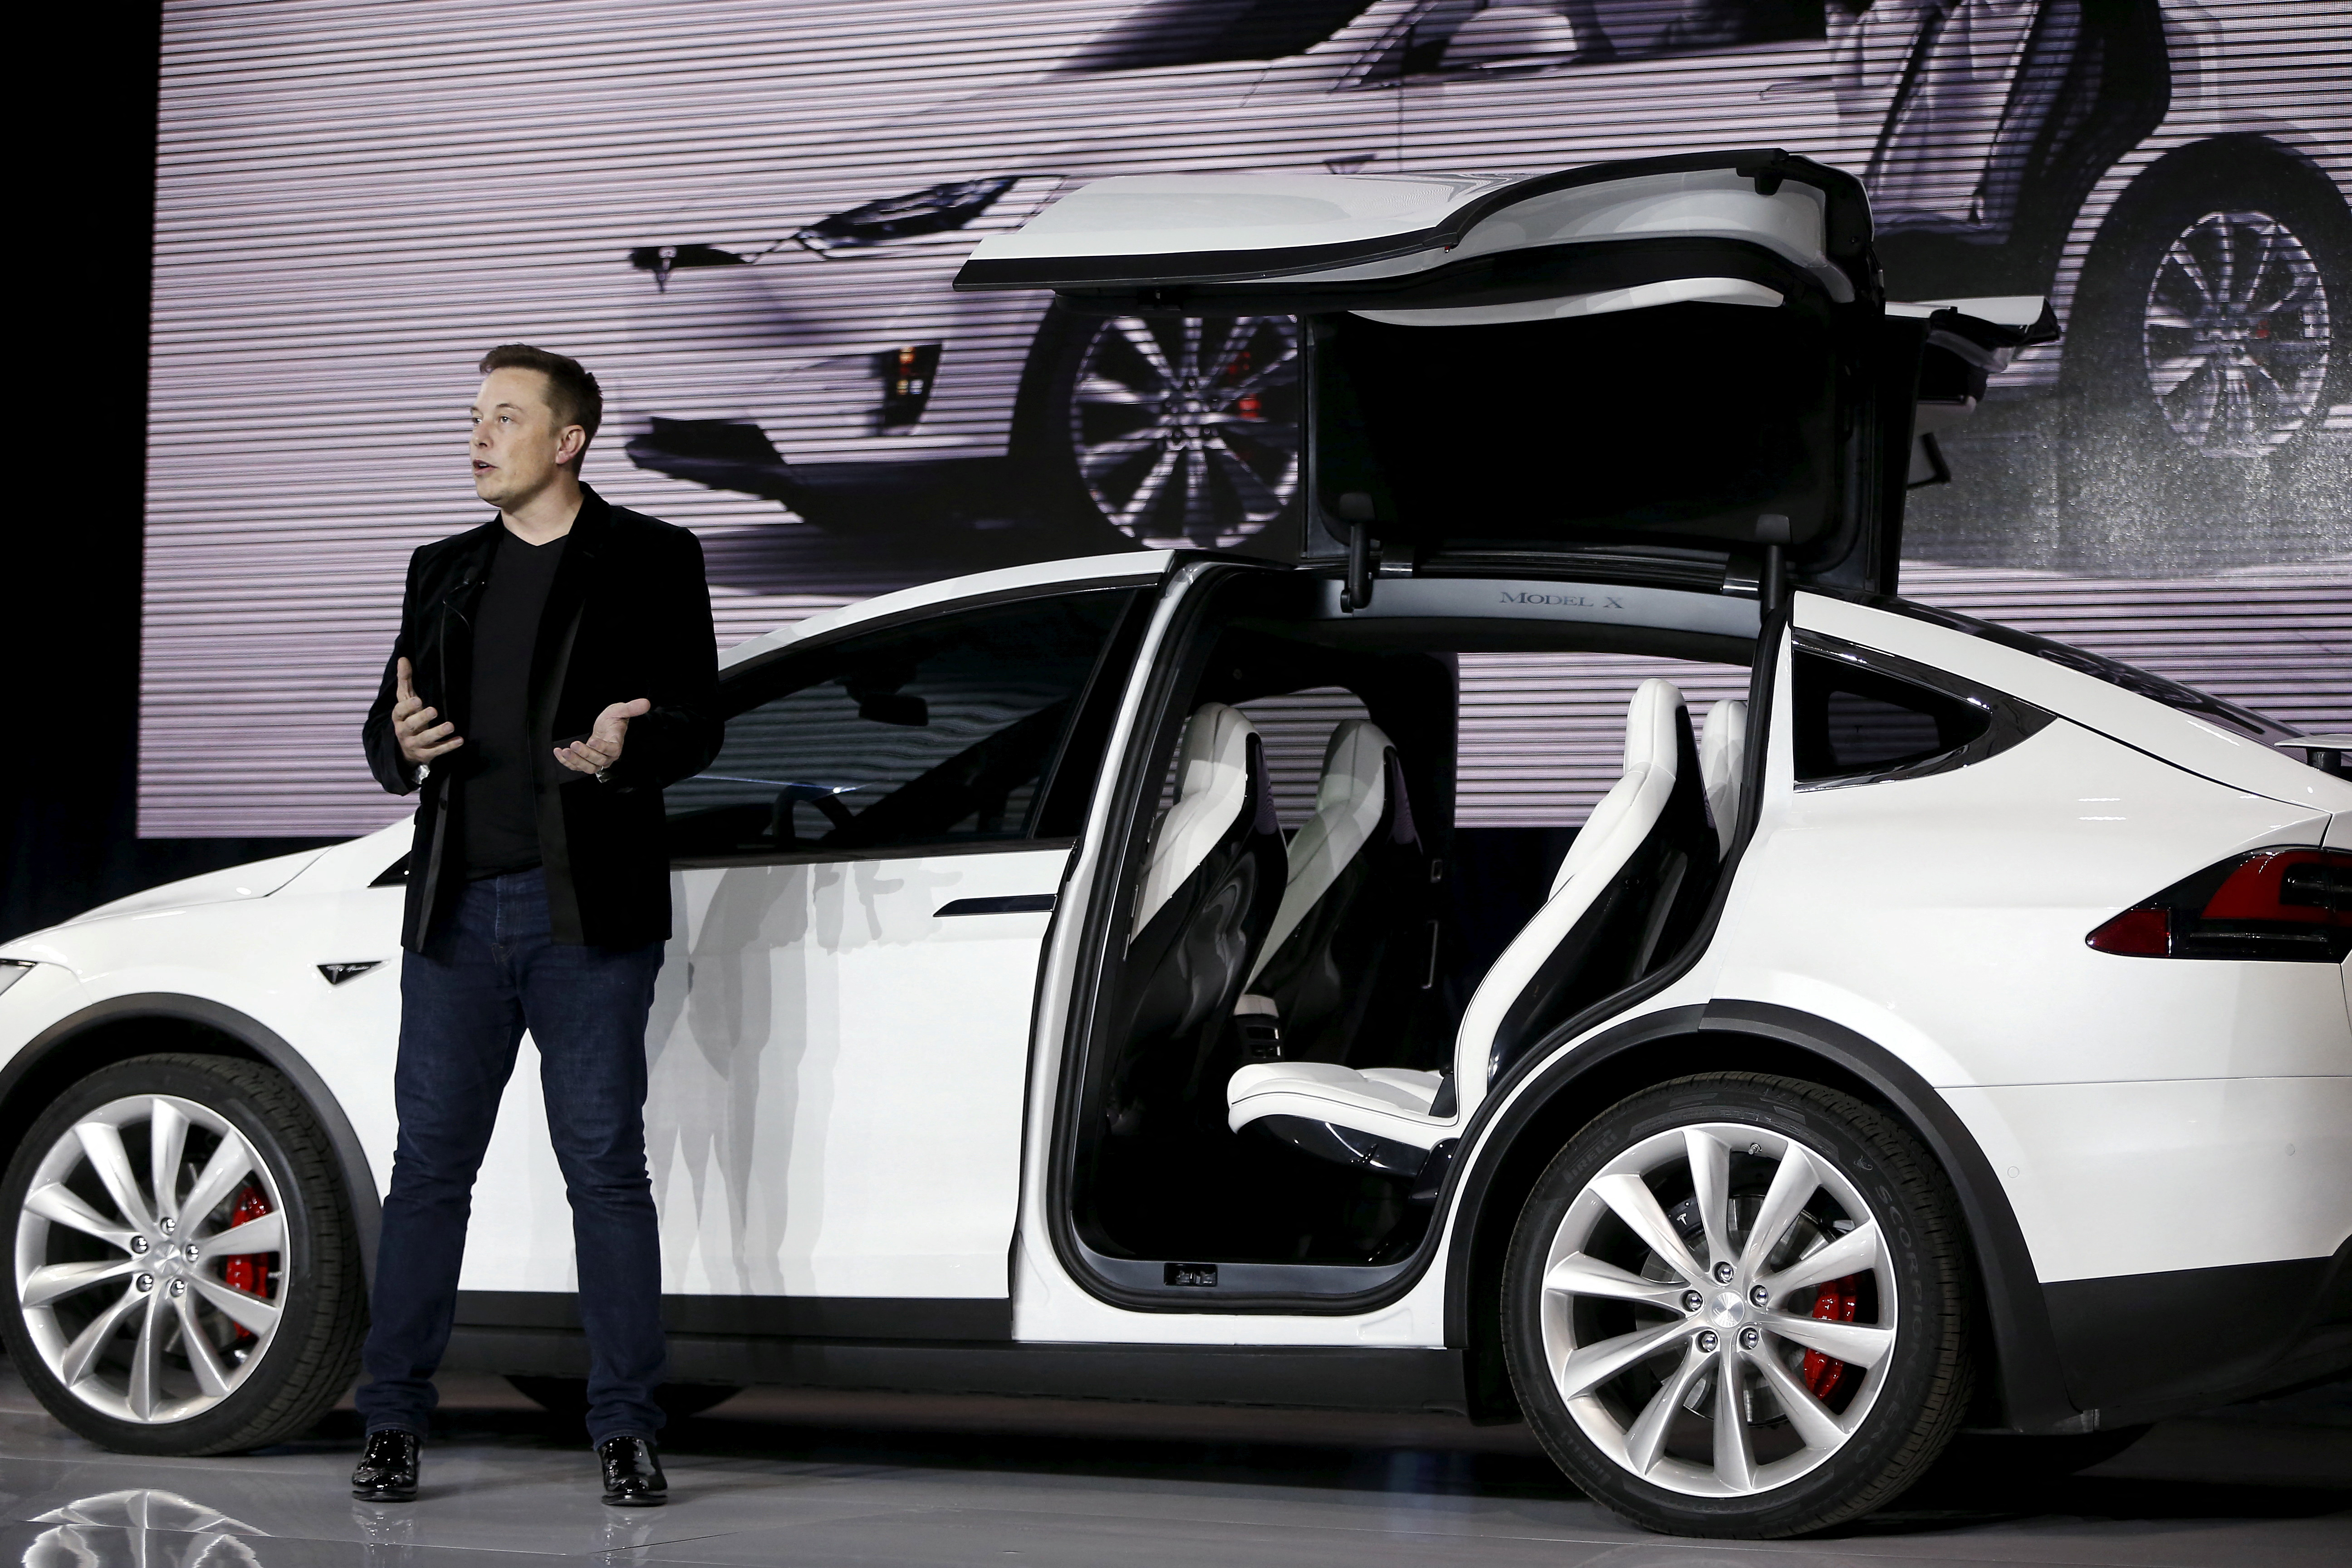 The latest blow came on January 3, after Tesla missed analysts' delivery expectations for the third straight quarter and reported that the gap between production and deliveries had widened.  (Reuters)